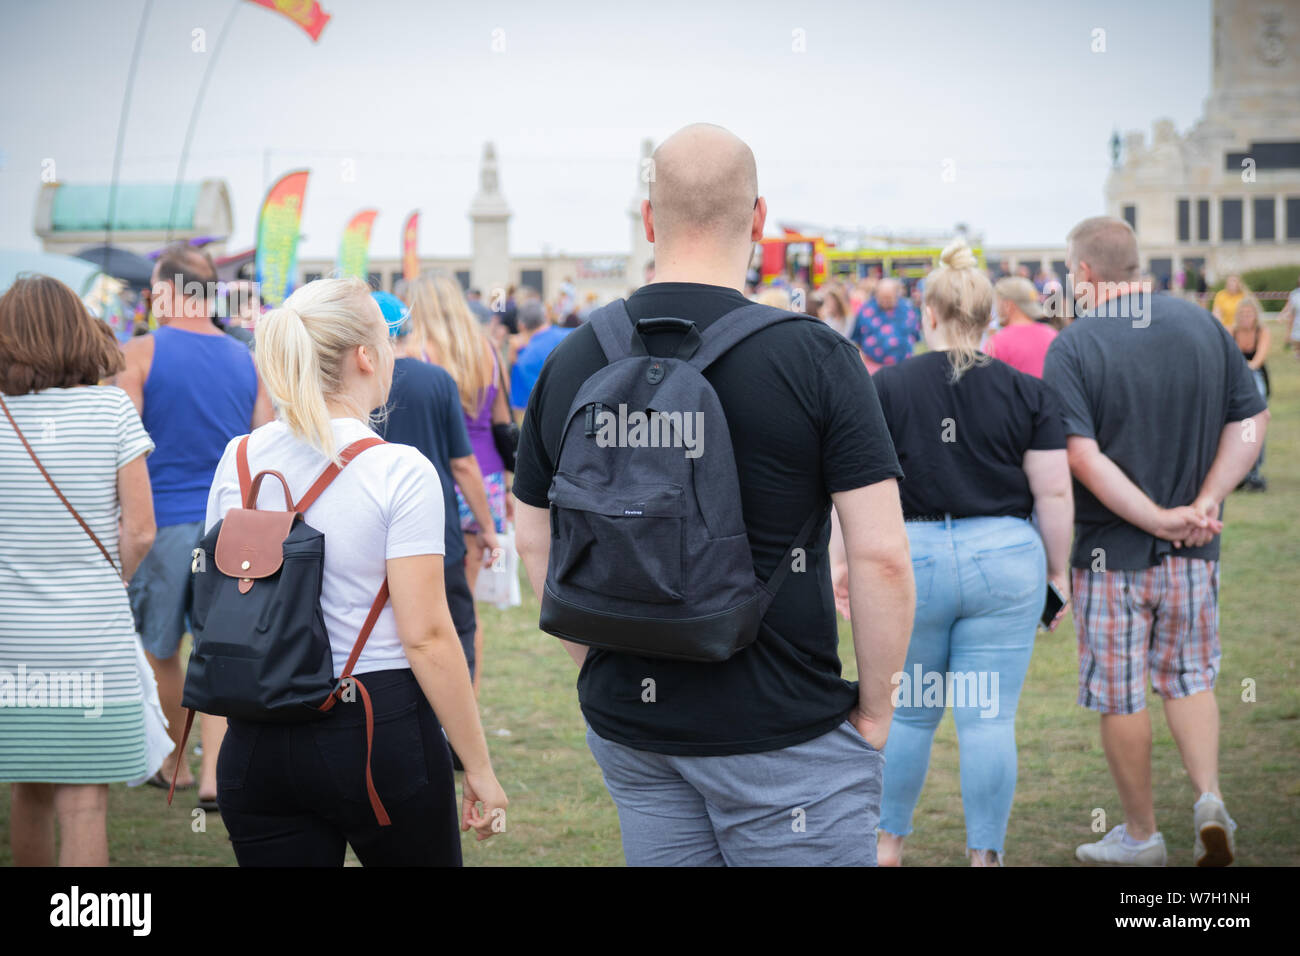 A couple wearing backpacks walking through a crowd at an outdoor festival Stock Photo